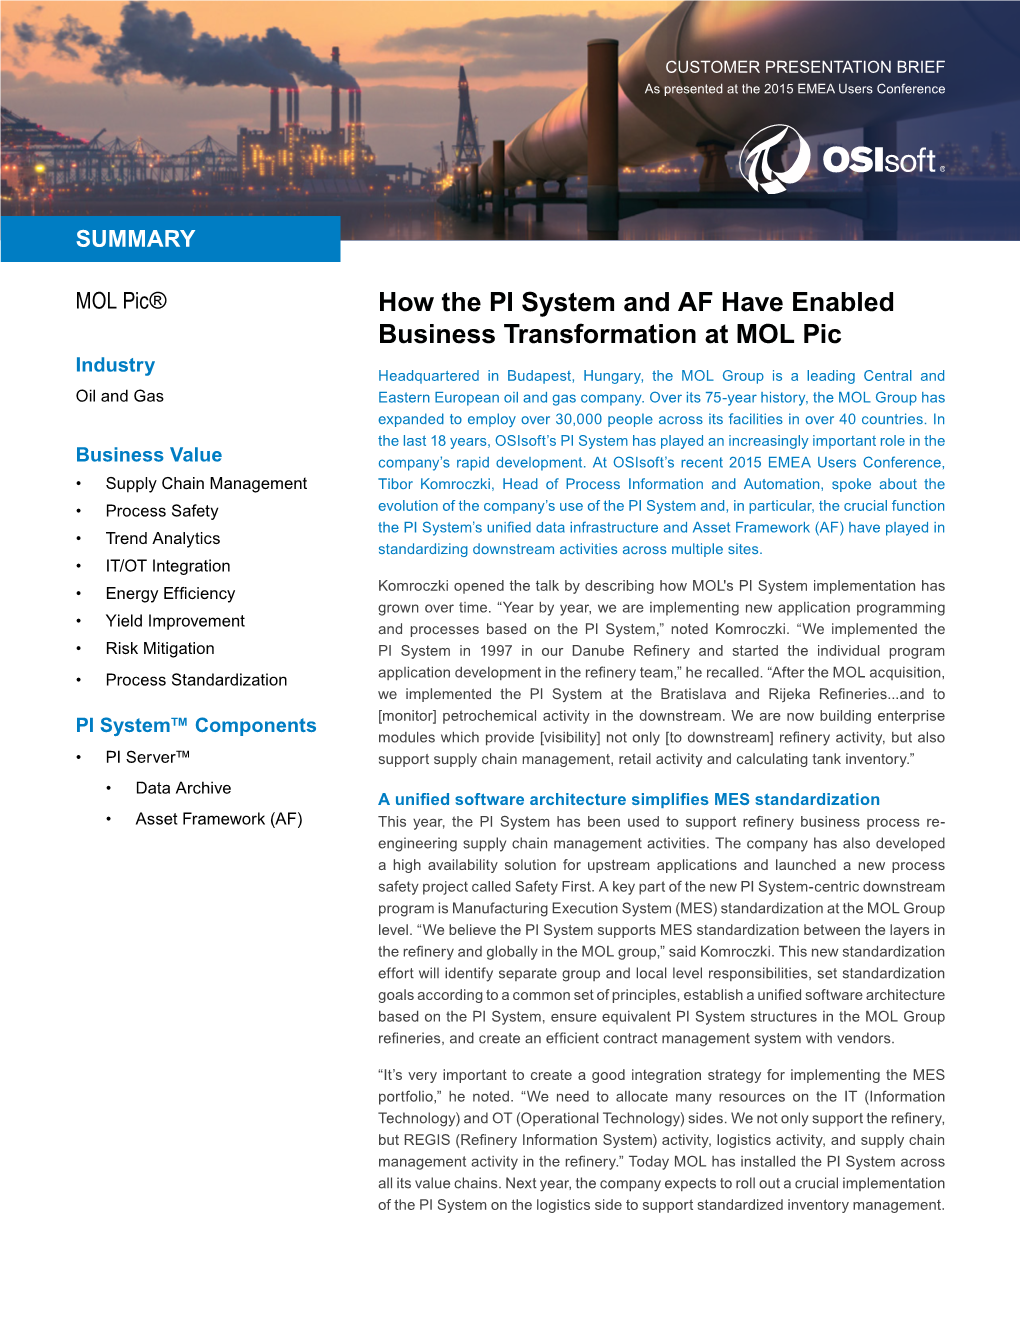 How the PI System and AF Have Enabled Business Transformation at MOL Pic